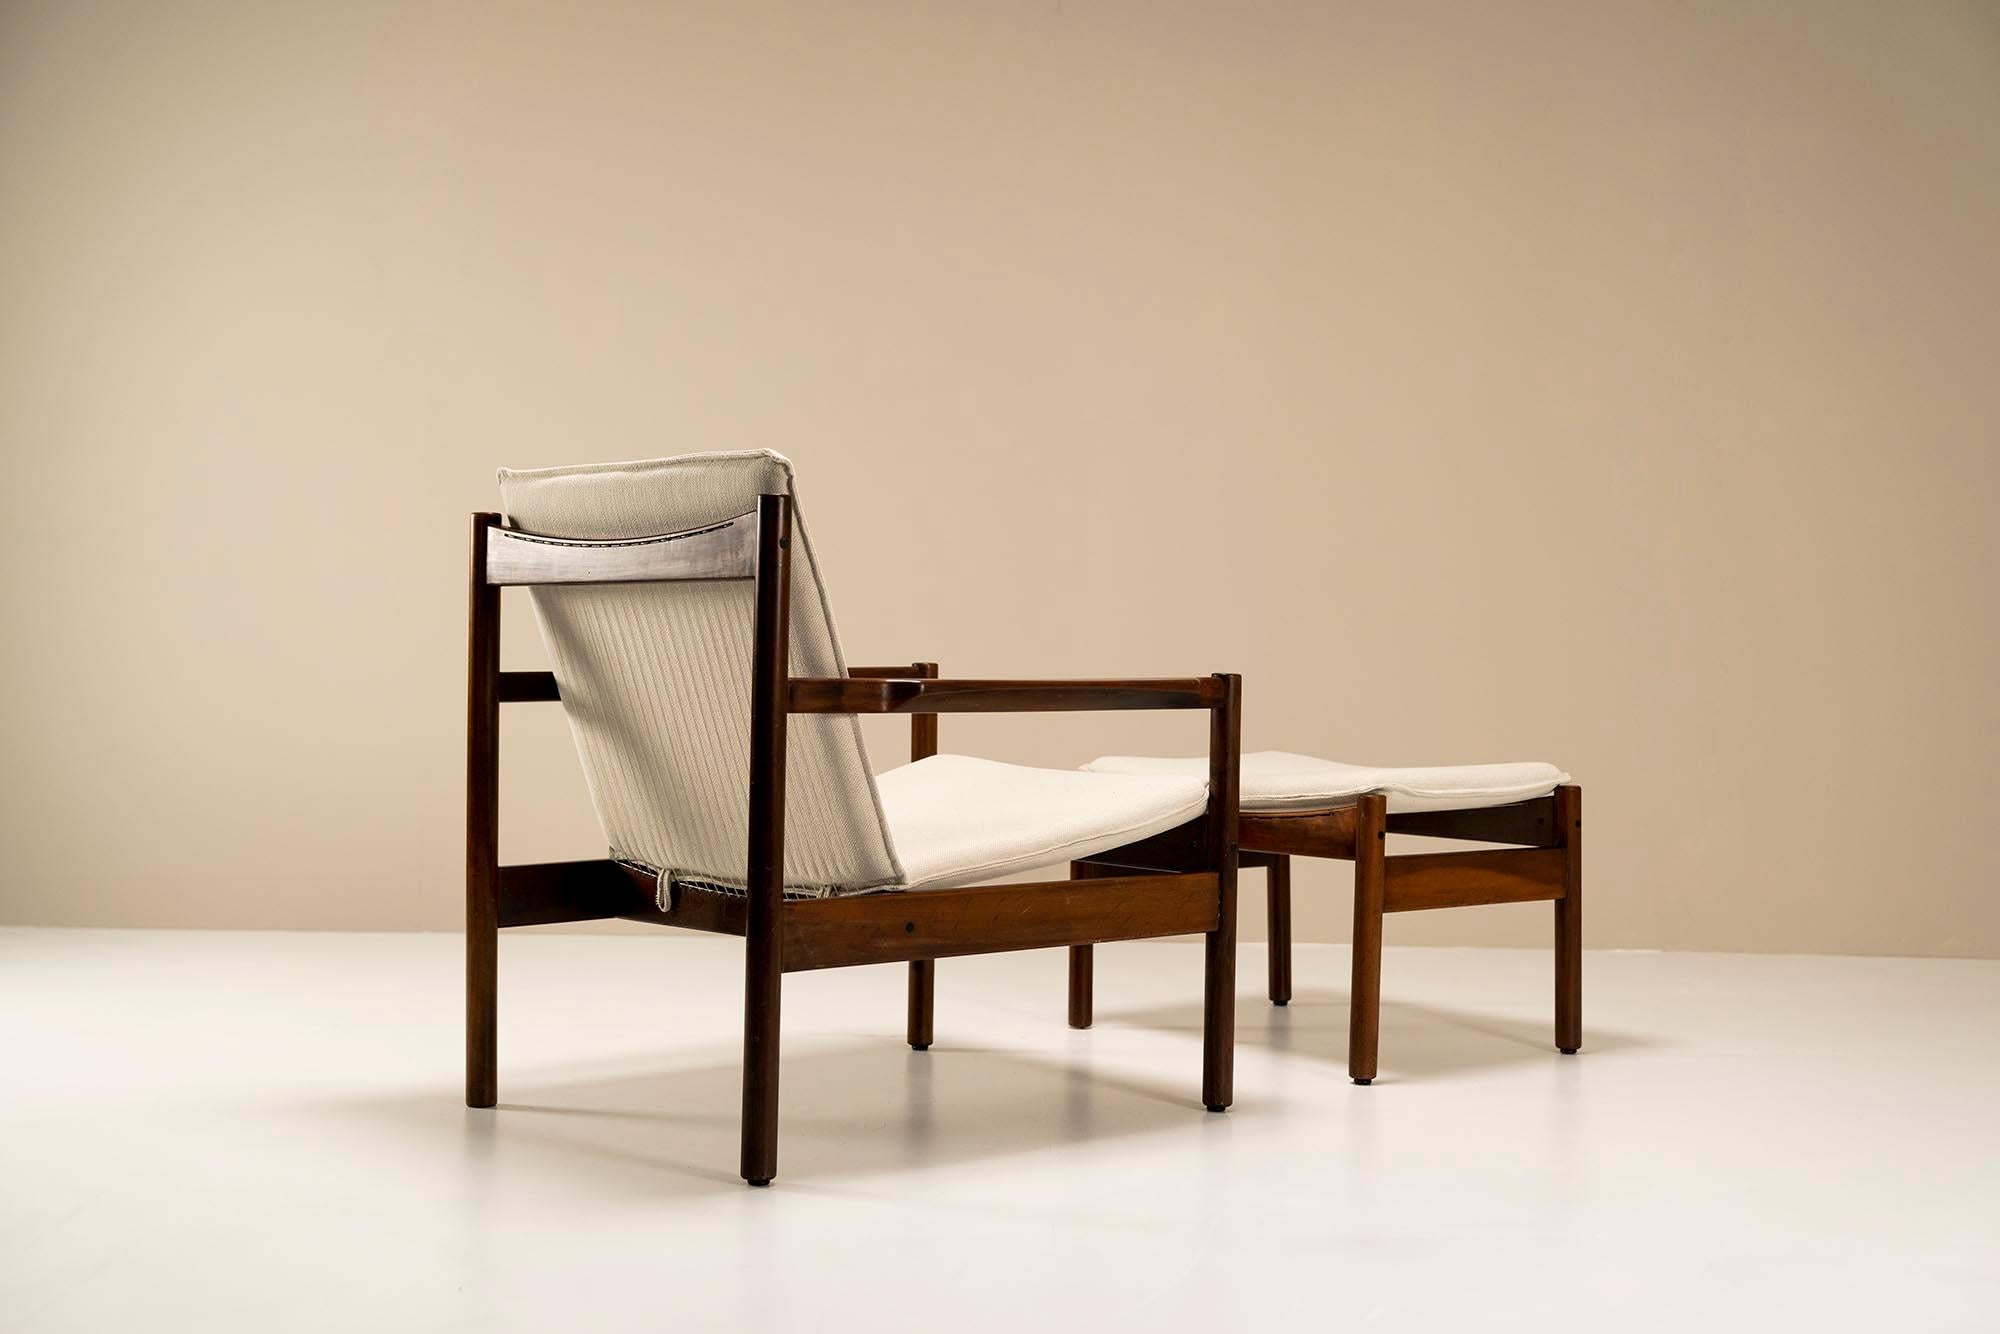 Michel Arnoult “Ouro Preto” lounge chair in imbuia wood with ottoman from 1958. Michel Arnoult left his native France for Brazil in the 1950s and quickly befriended the famous architect Oscar Niemeyer and painter Cândido Portinari. He then set up